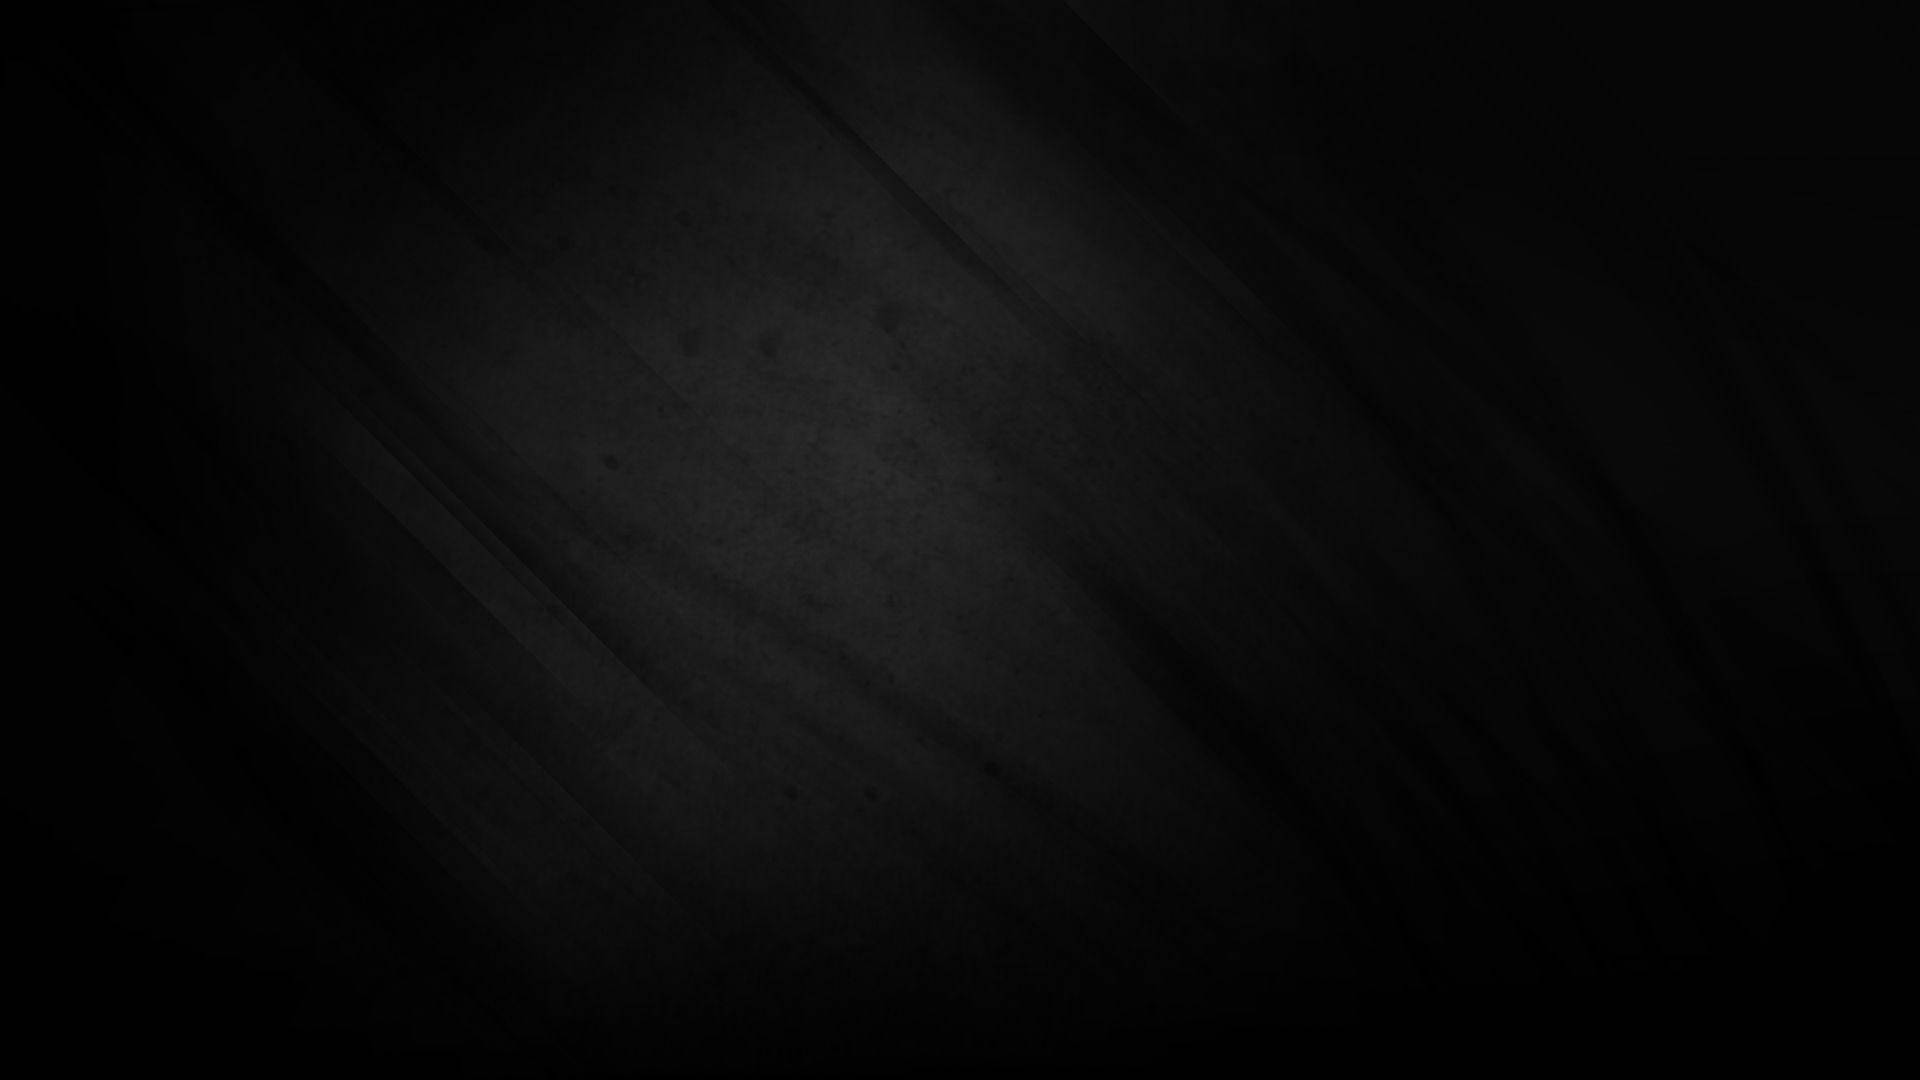 Pure Black With Fabric Texture Background